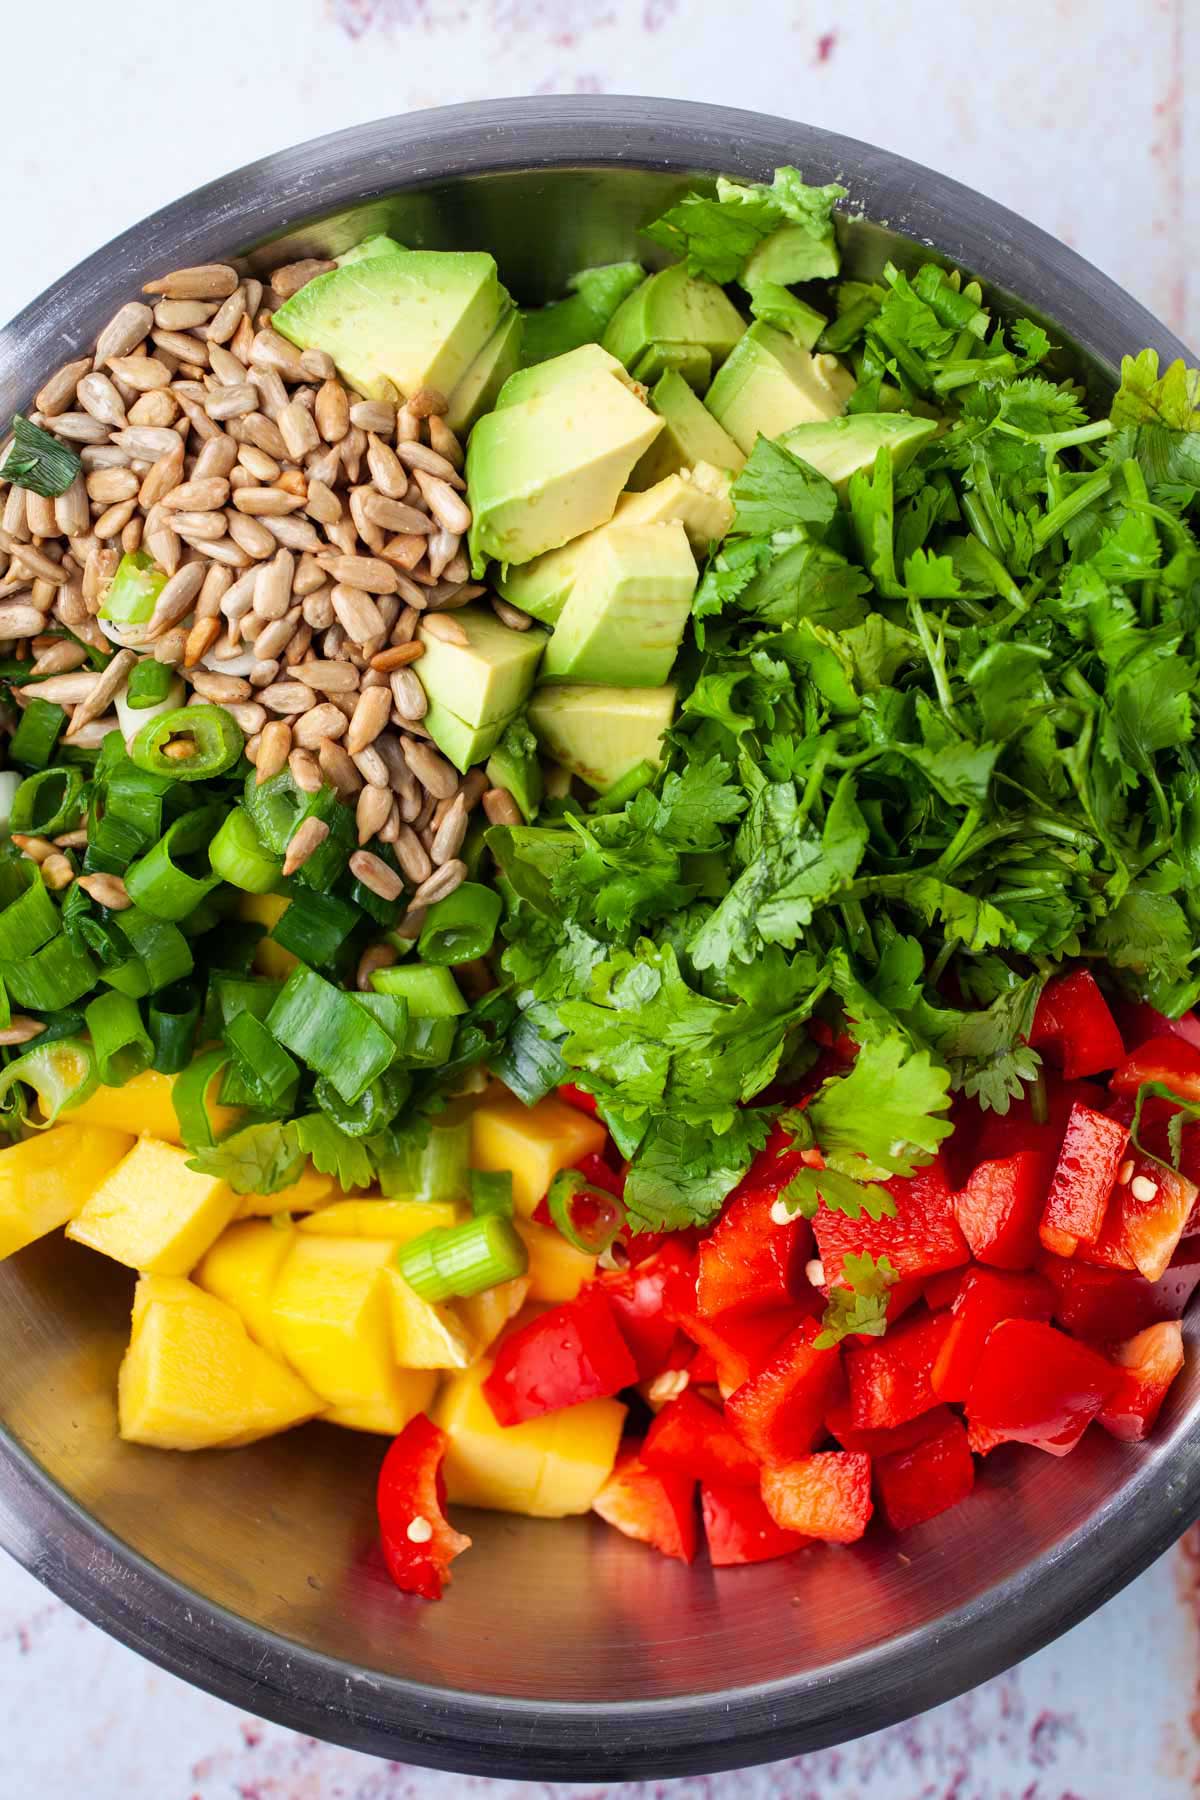 Chopped bell pepper, avocado, cilantro, onions, mango, and sunflower seeds in a large bowl.